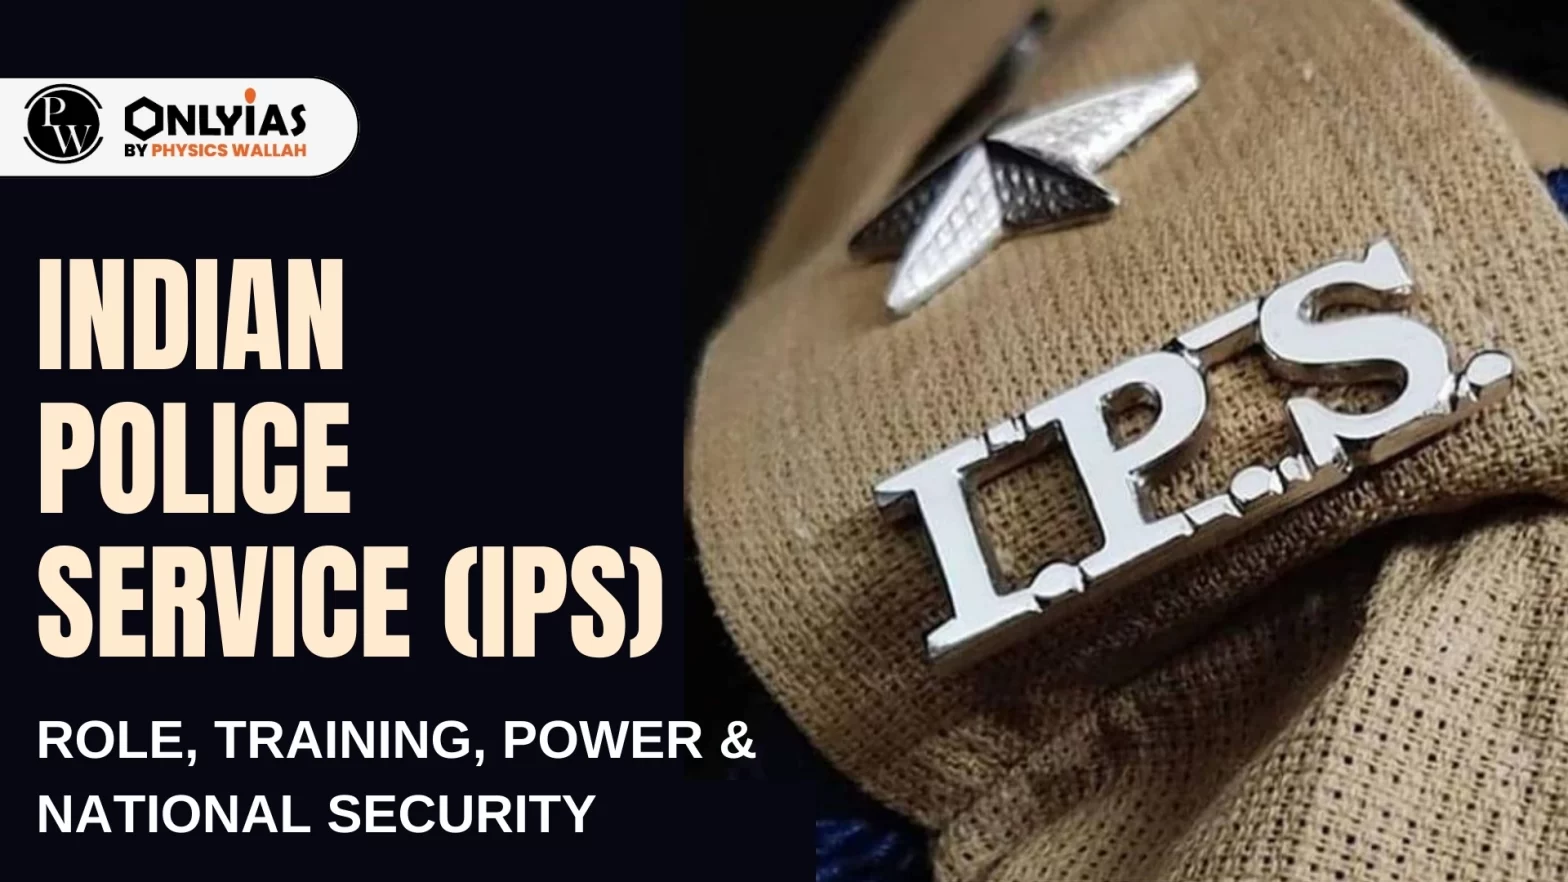 Indian Police Service (IPS): Role, Training, Power & National Security